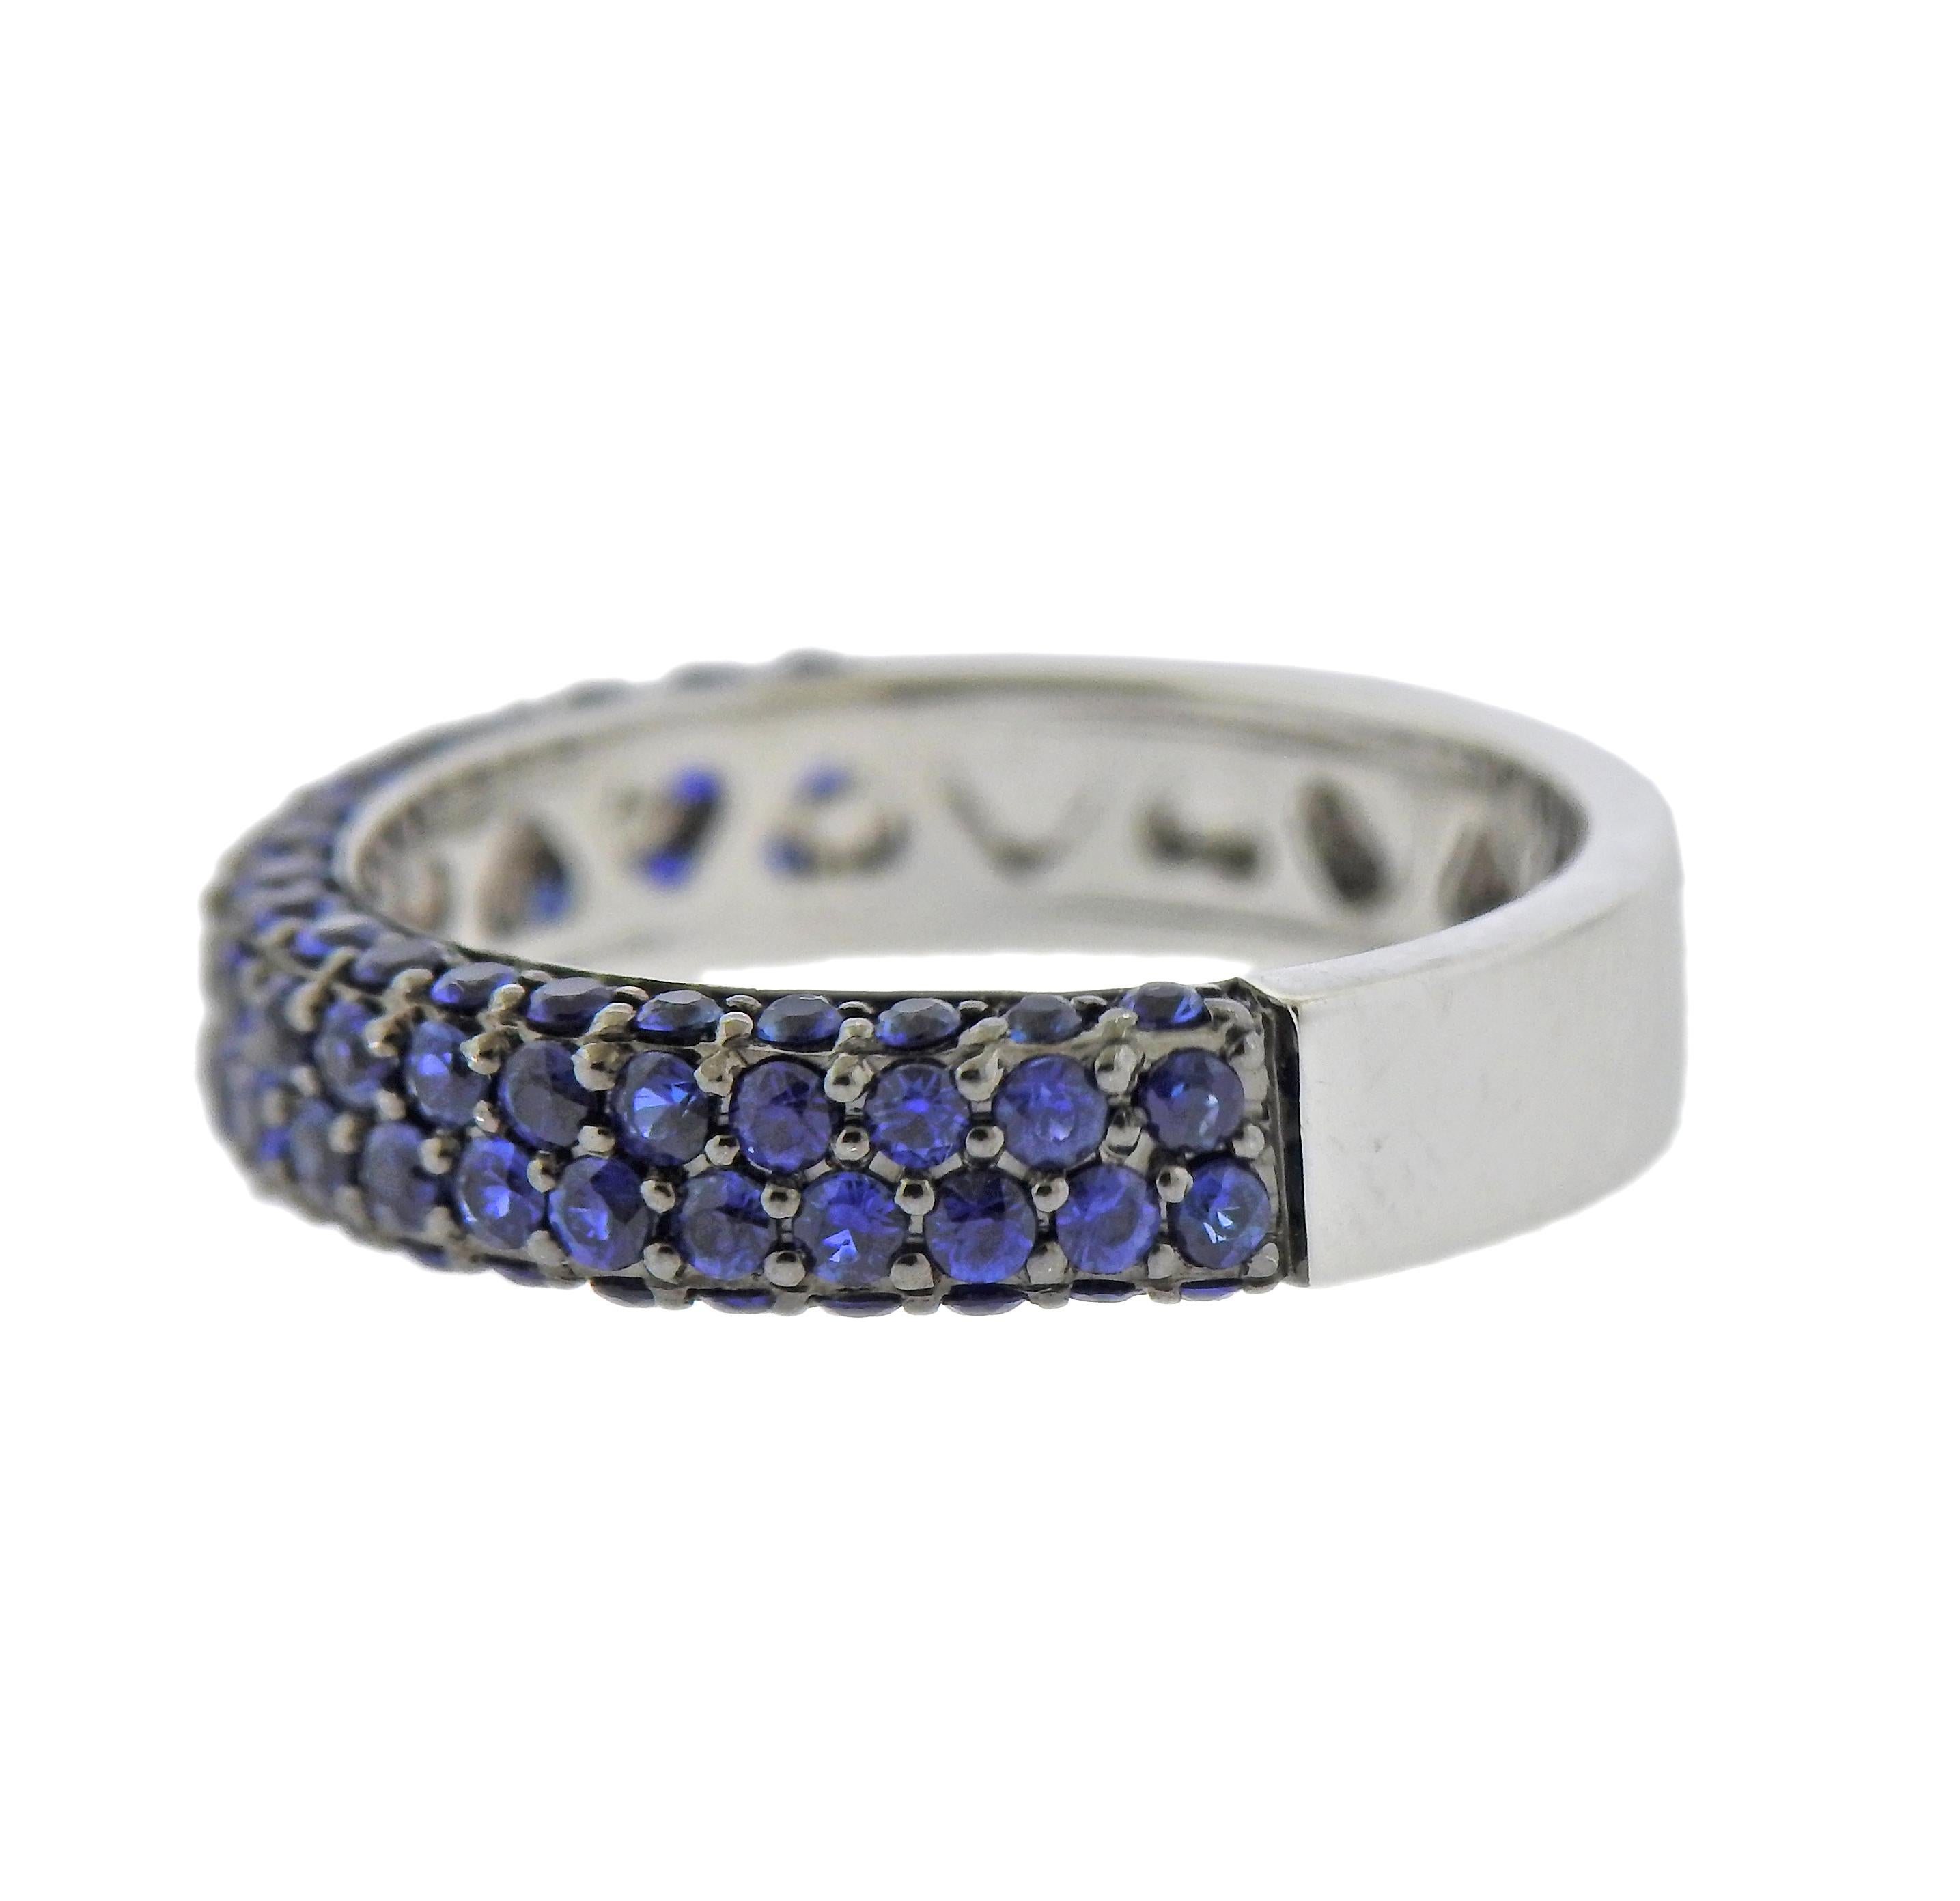 18k white gold half band ring with sapphires. Ring size - 5.5, ring is 4.3mm wide. Marked: 750. Weight - 3.7 grams.